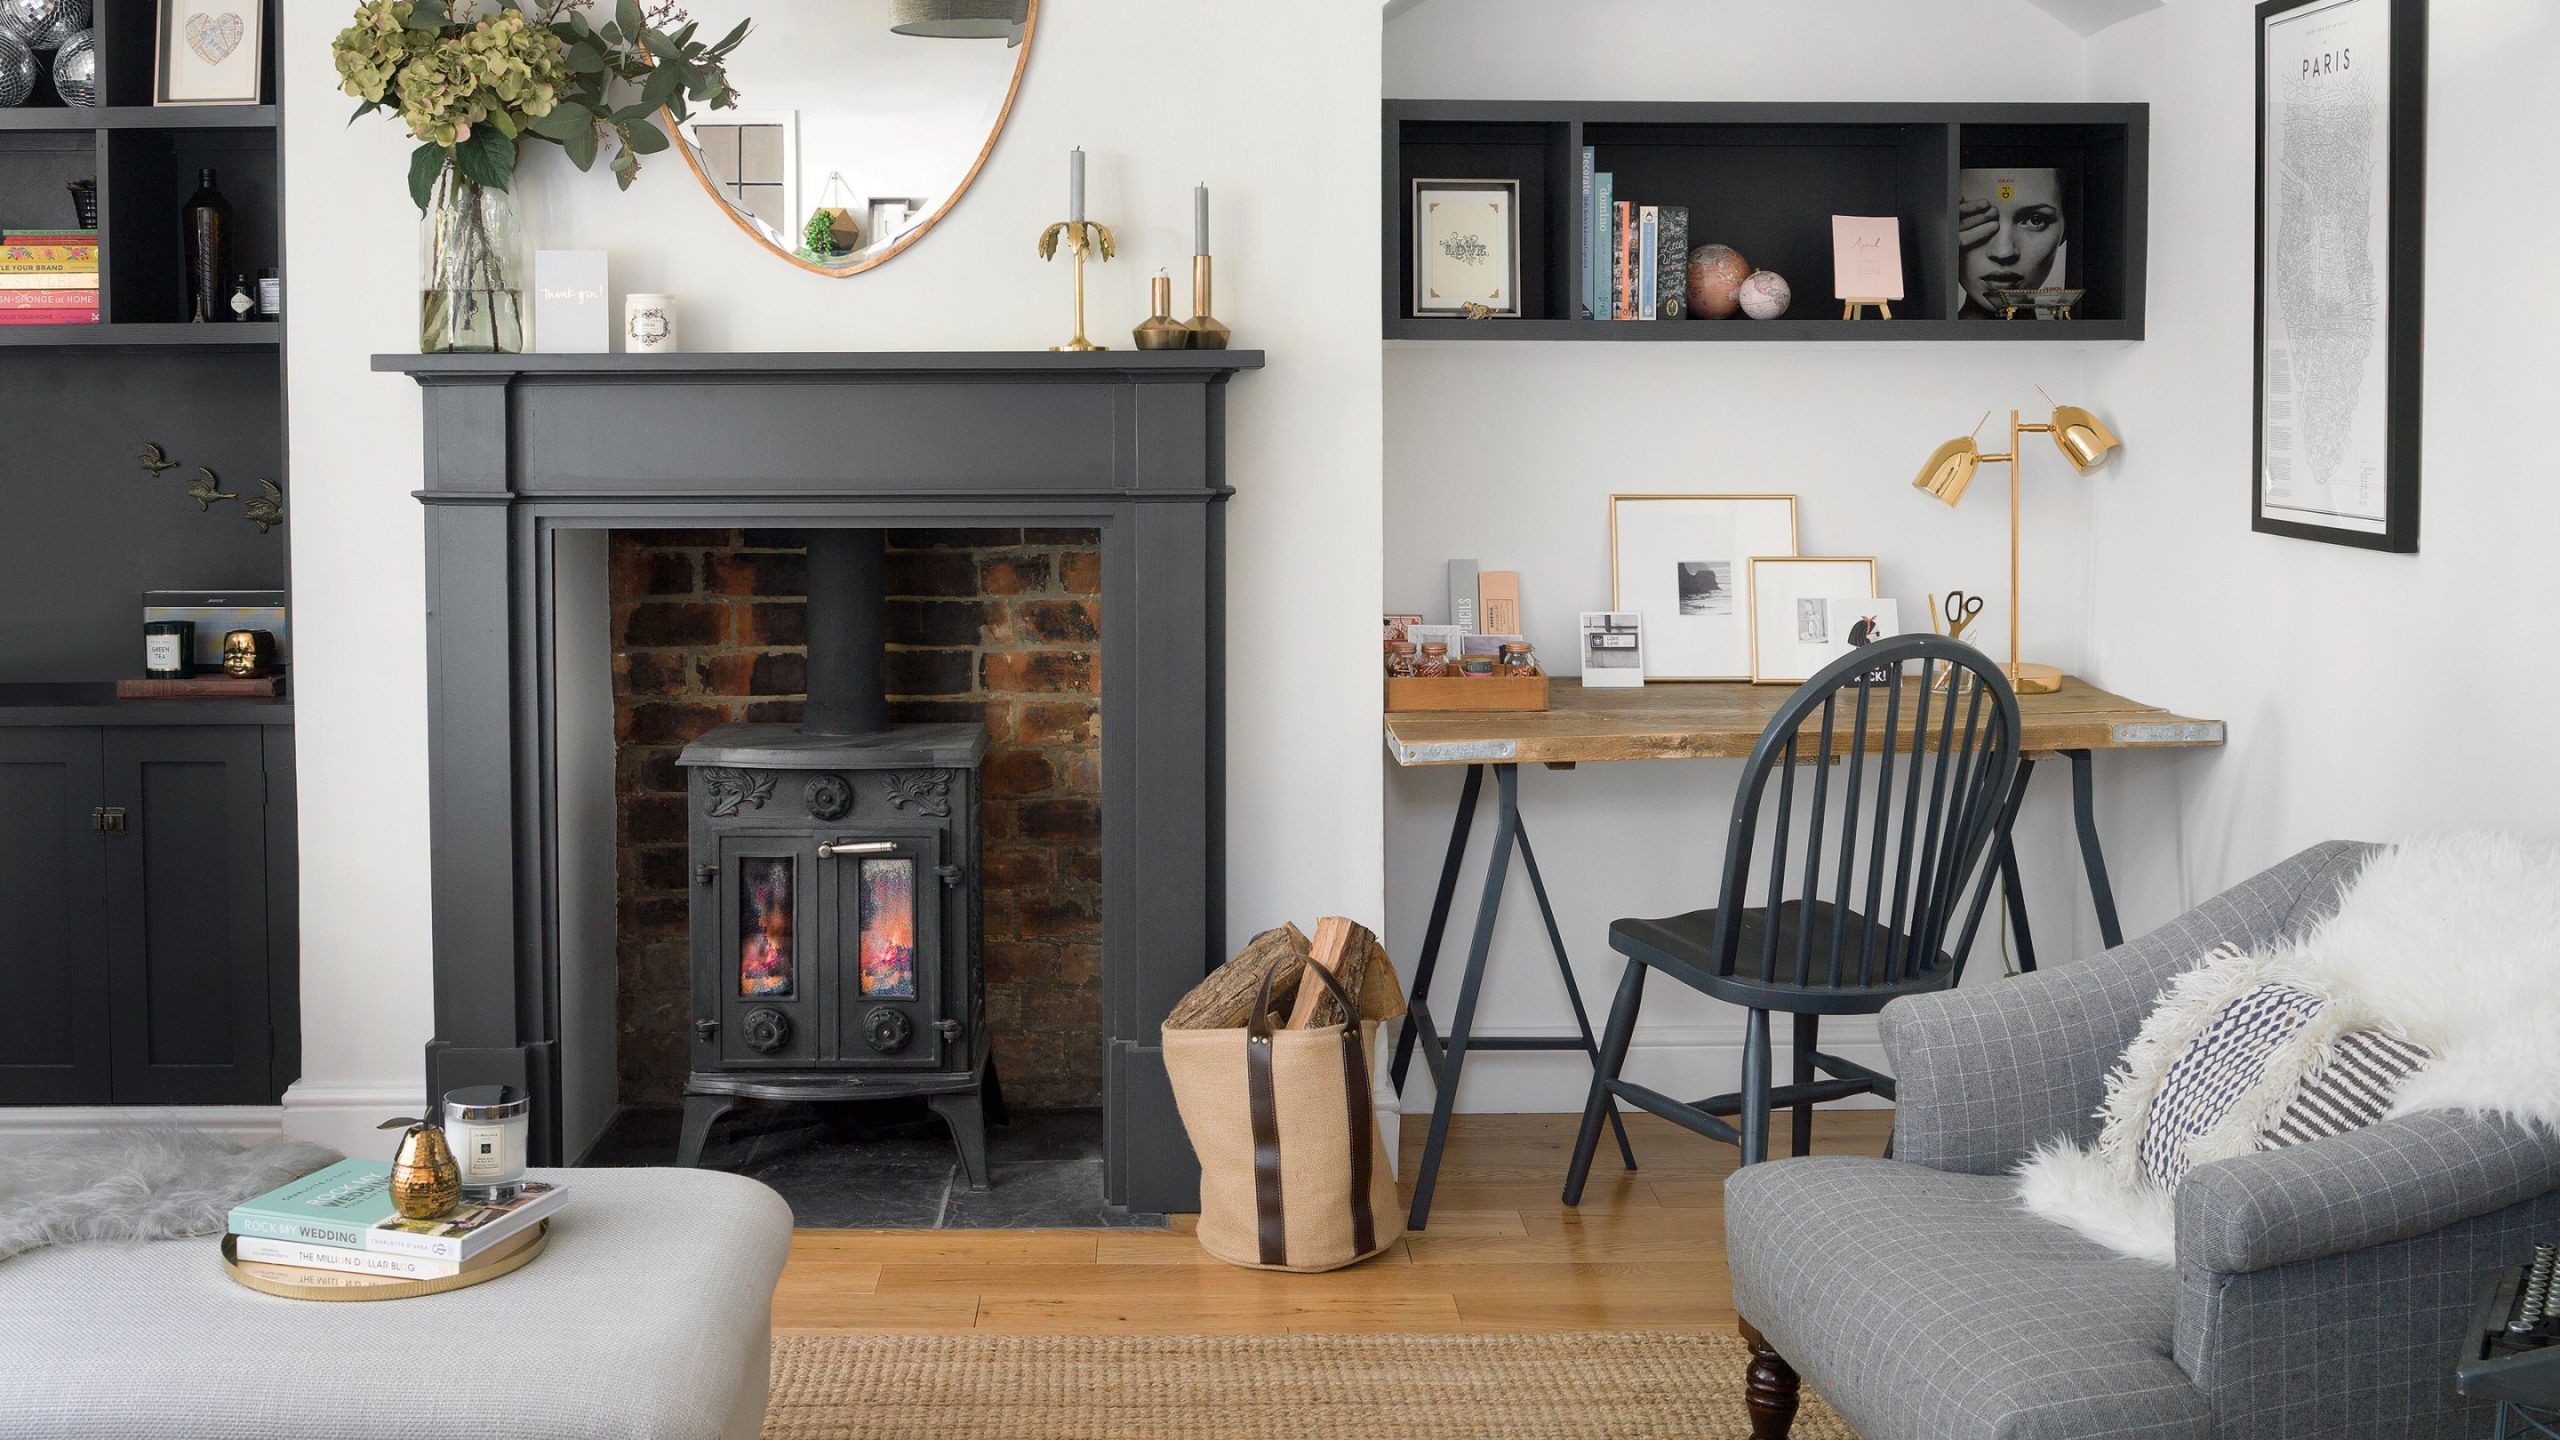 Wood burner ideas – find the perfect one for your fireplace